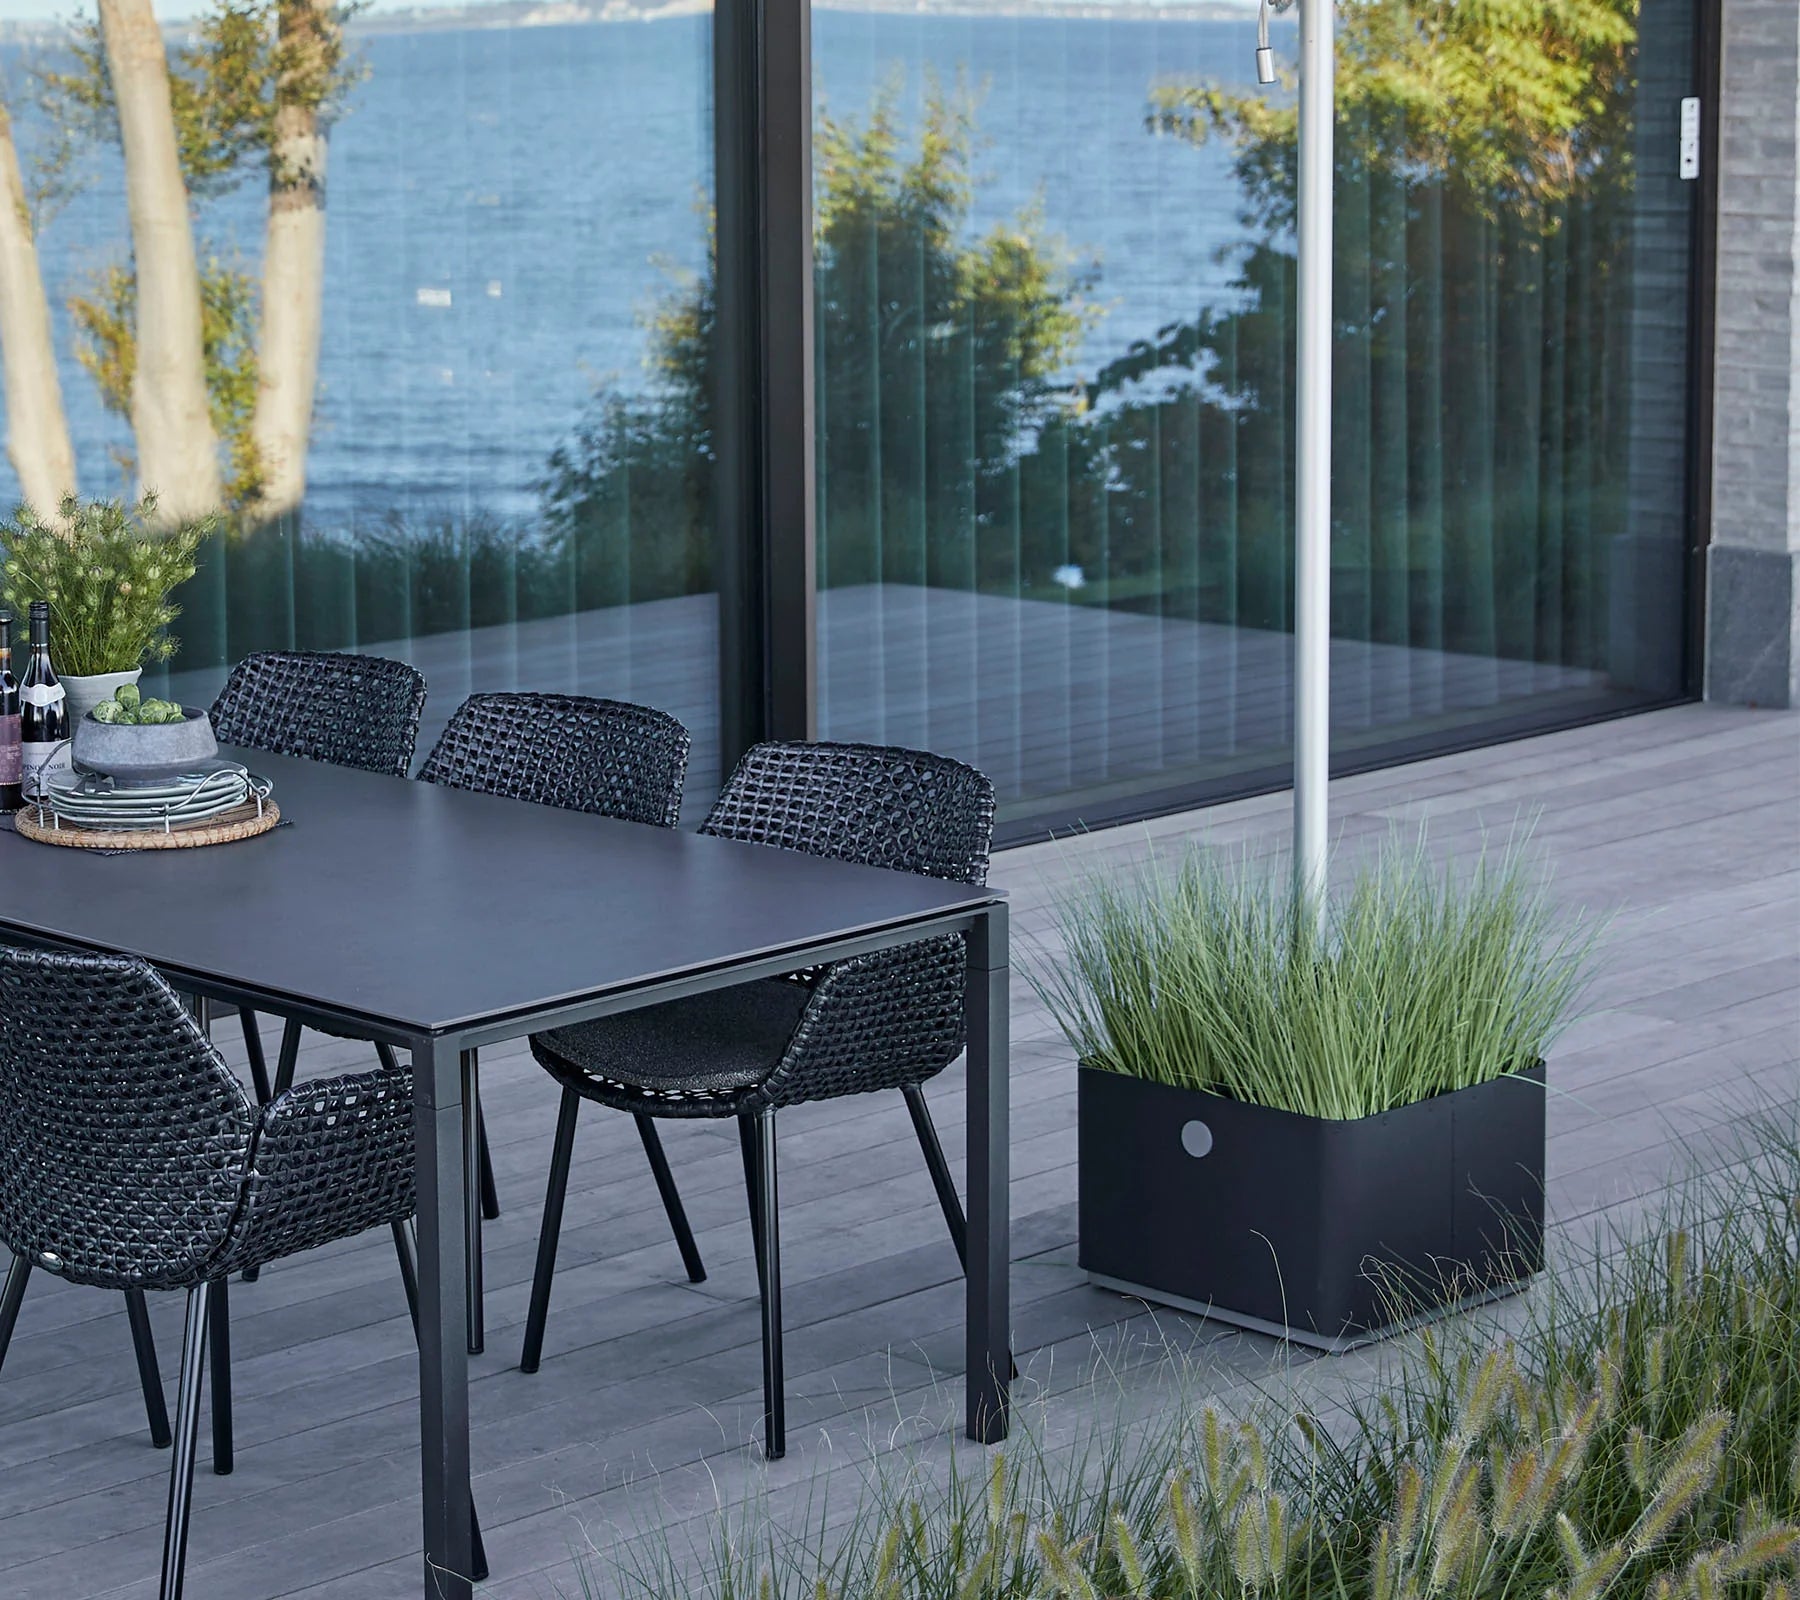 Boxhill's Grow Umbrella Base and Planter Box with Wheels lifestyle image beside dining table and dining chairs at patio